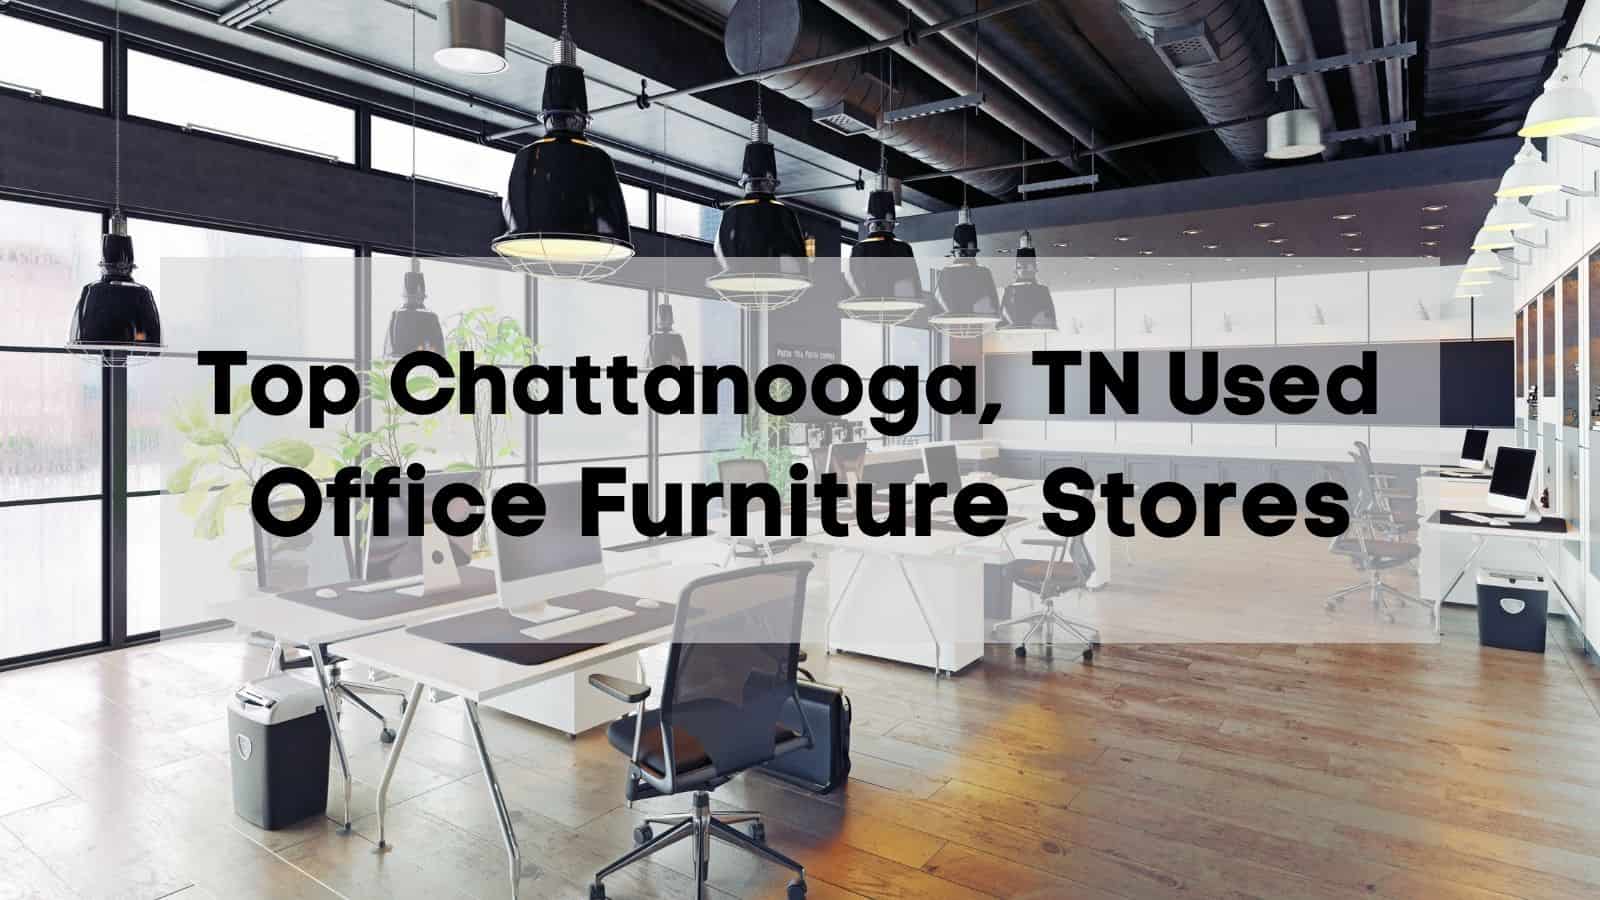 Top Used Office Furniture Stores In Chattanooga, TN